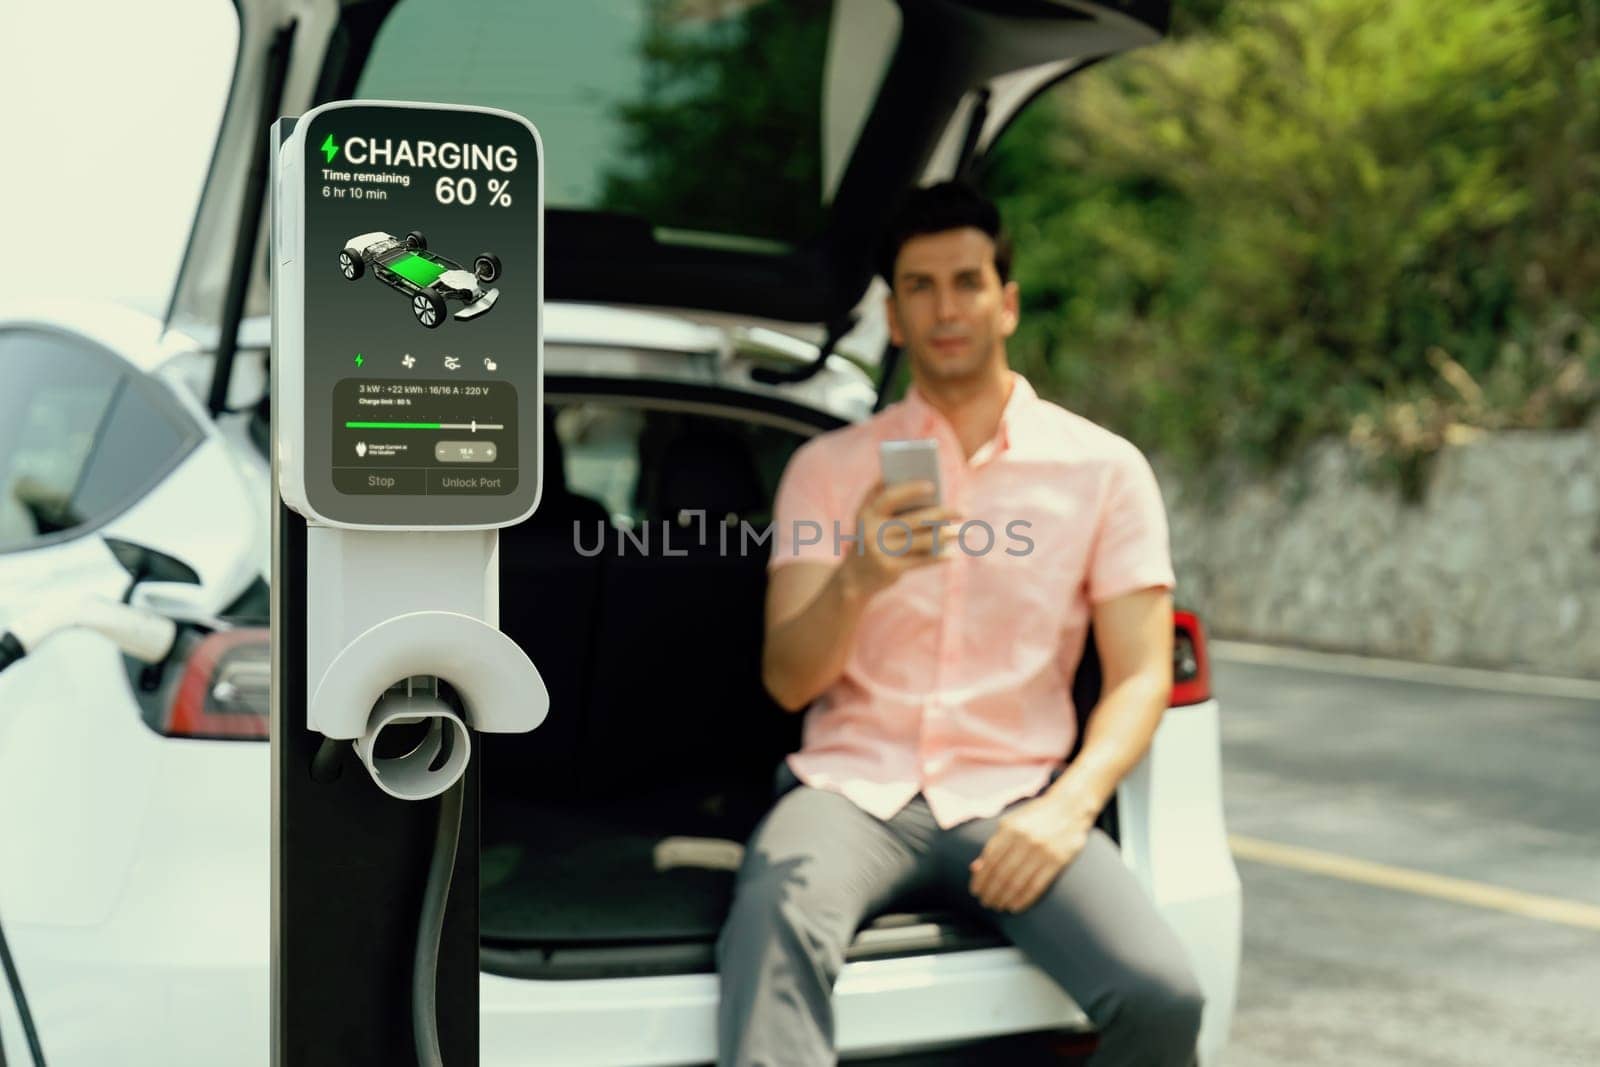 EV car recharging battery from outdoor EV charger display battery status on blur background of man using smartphone with natural scenic as concept of eco-friendly travel with clean energy. Perpetual